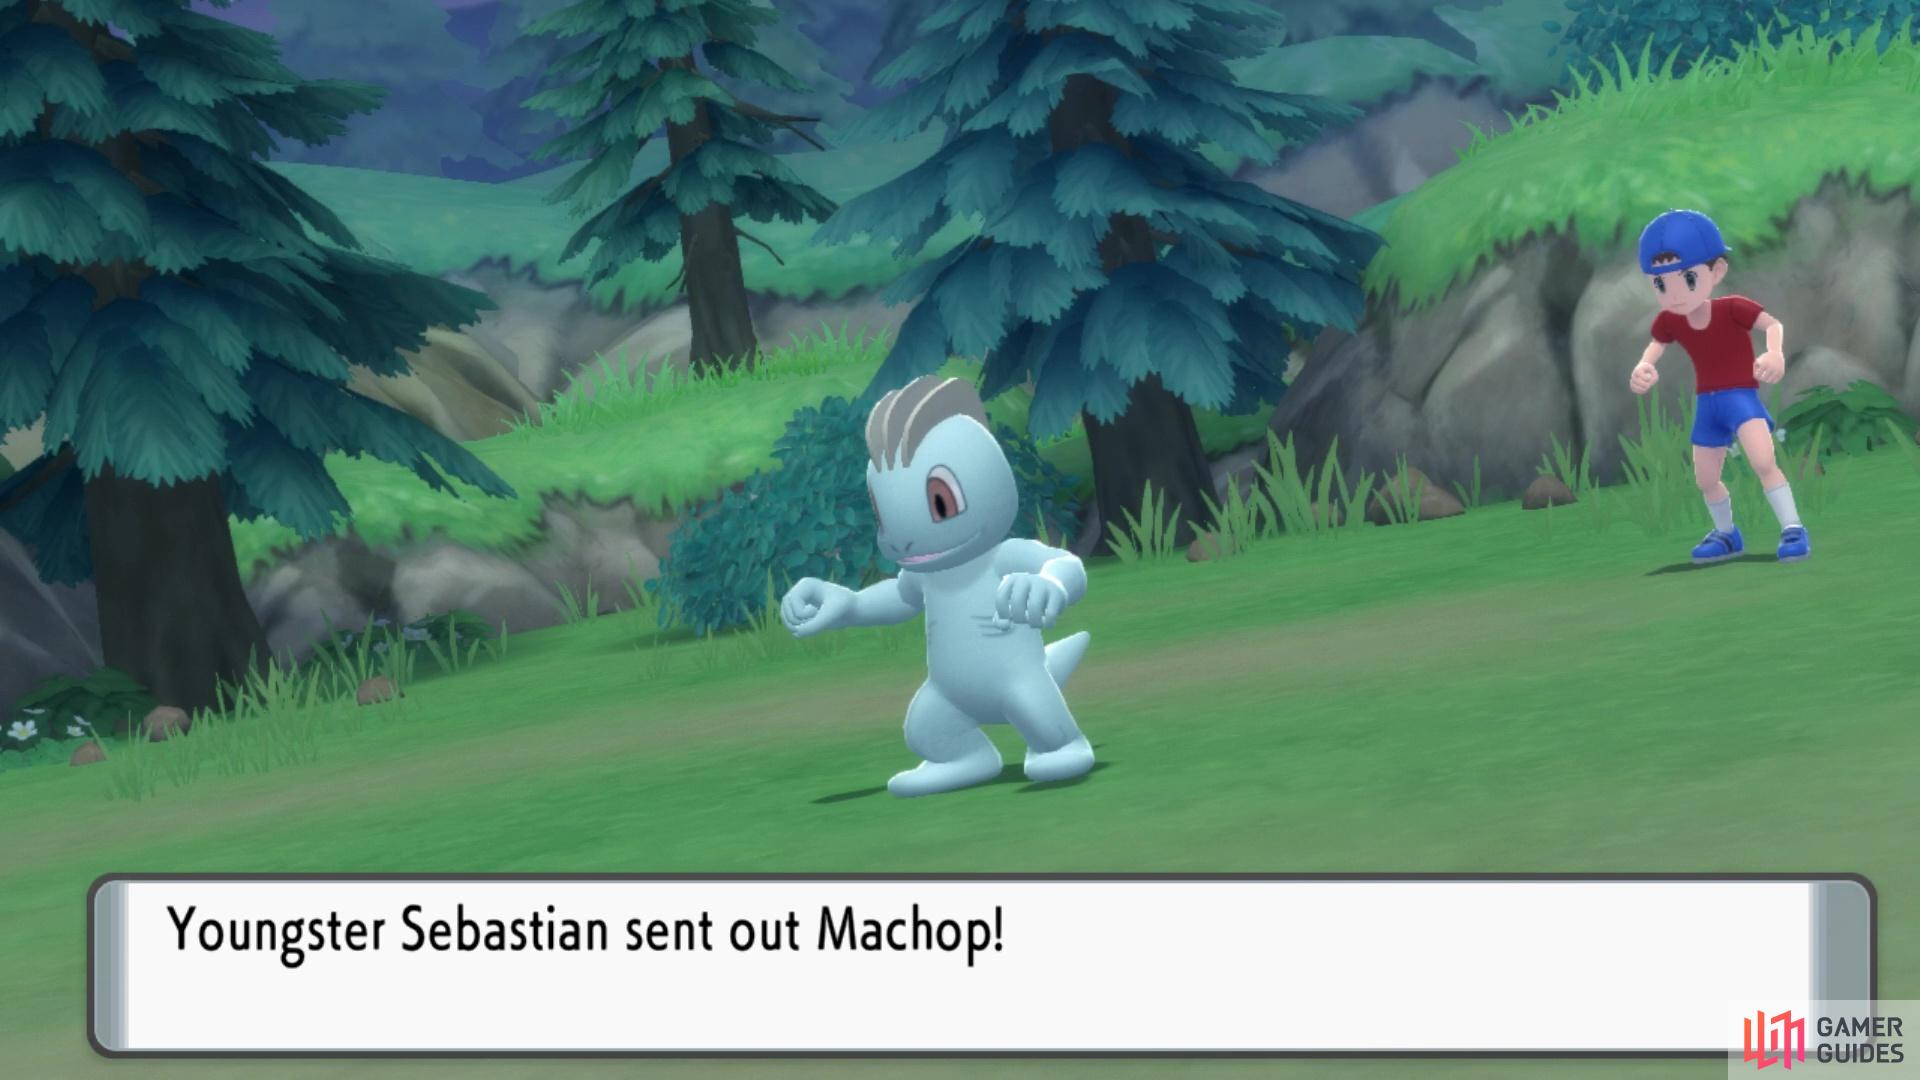 Youngster Sebastian sends out a Machop!